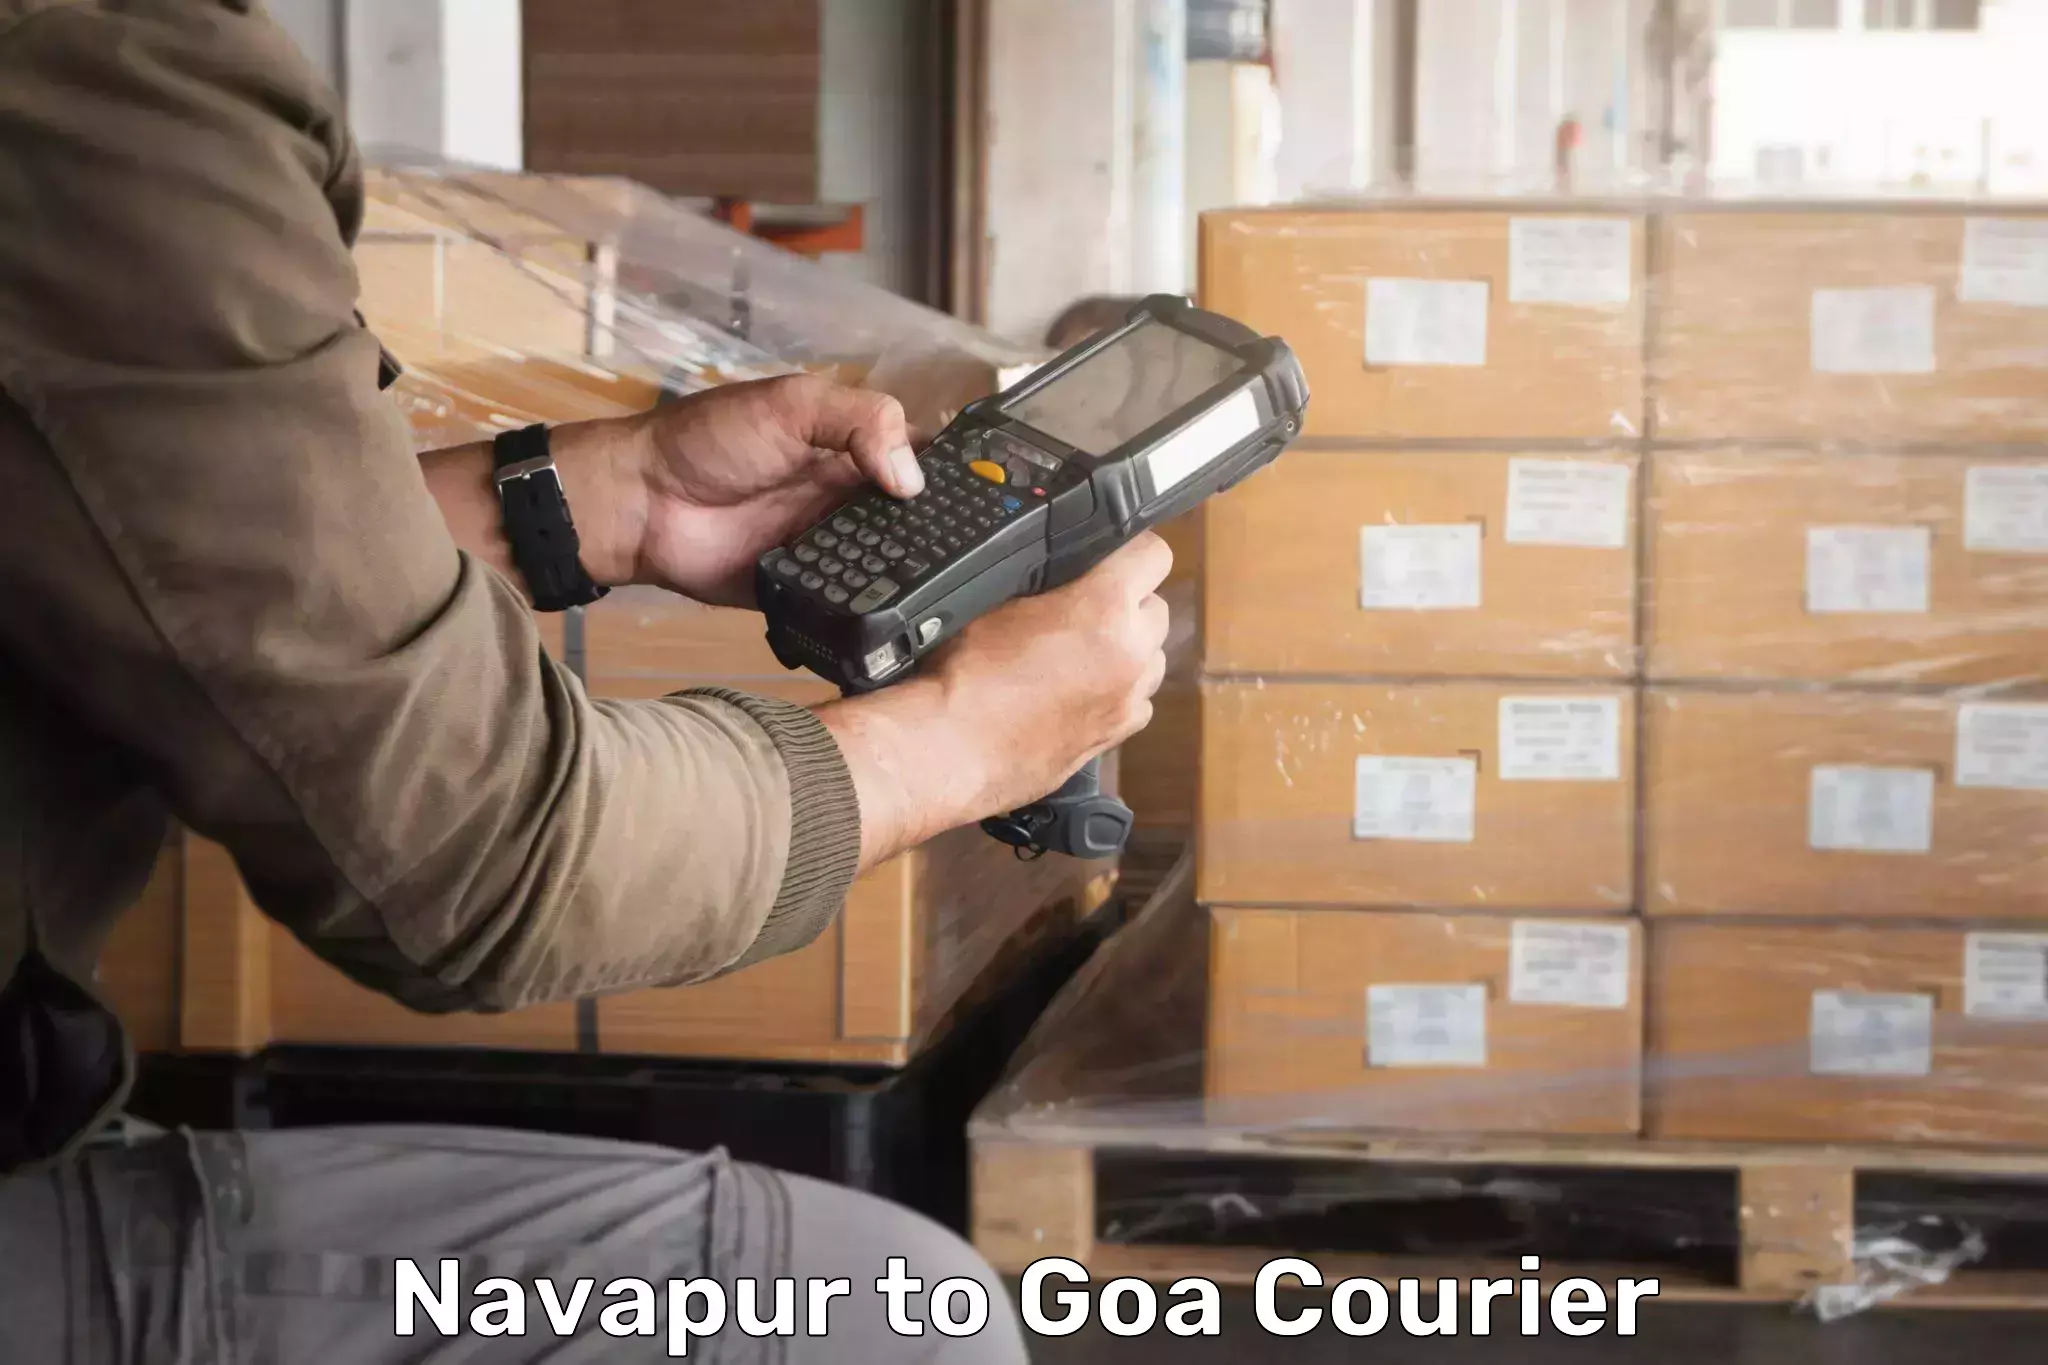 Package tracking in Navapur to Goa